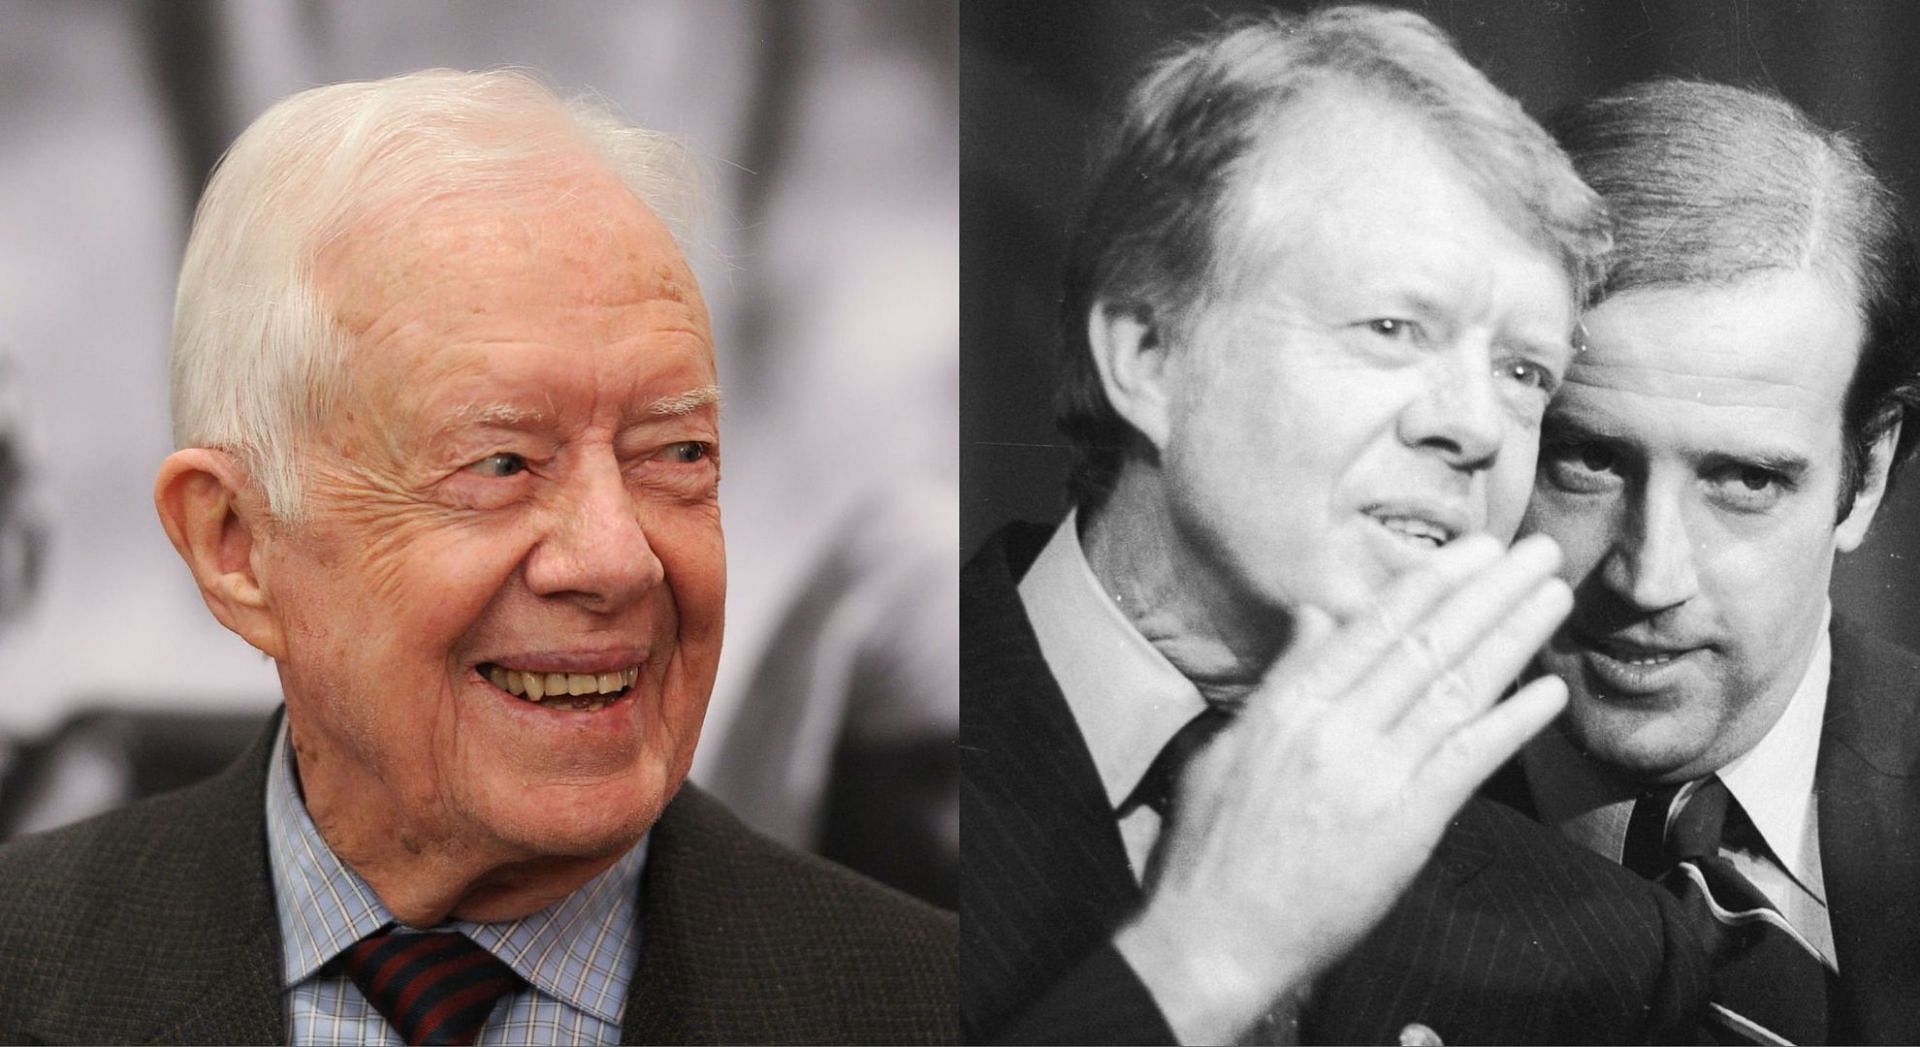 Joe Biden revealed that Jimmy Carter asked him to deliver his eulogy after his passing (Image via Getty Images) 